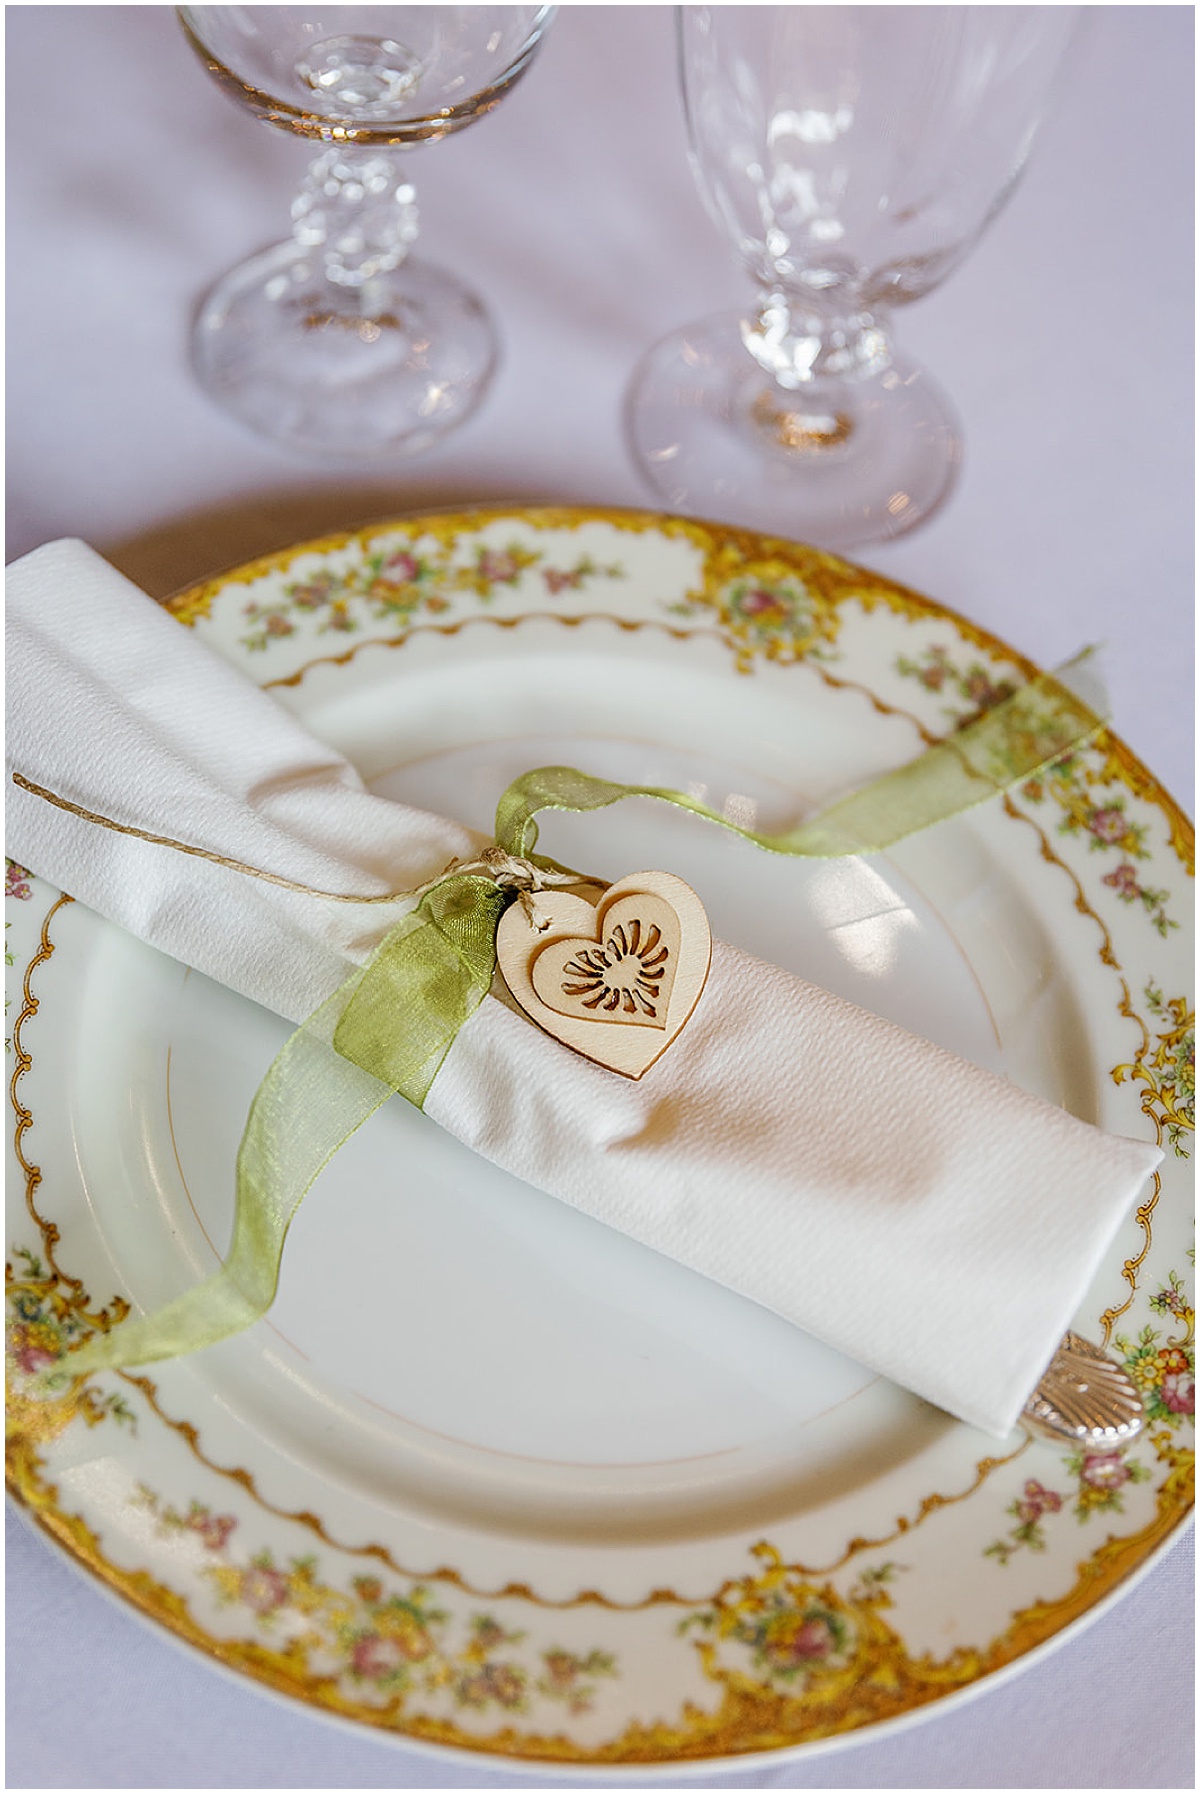 Vintage inspired wedding with plate, napkins and glasses